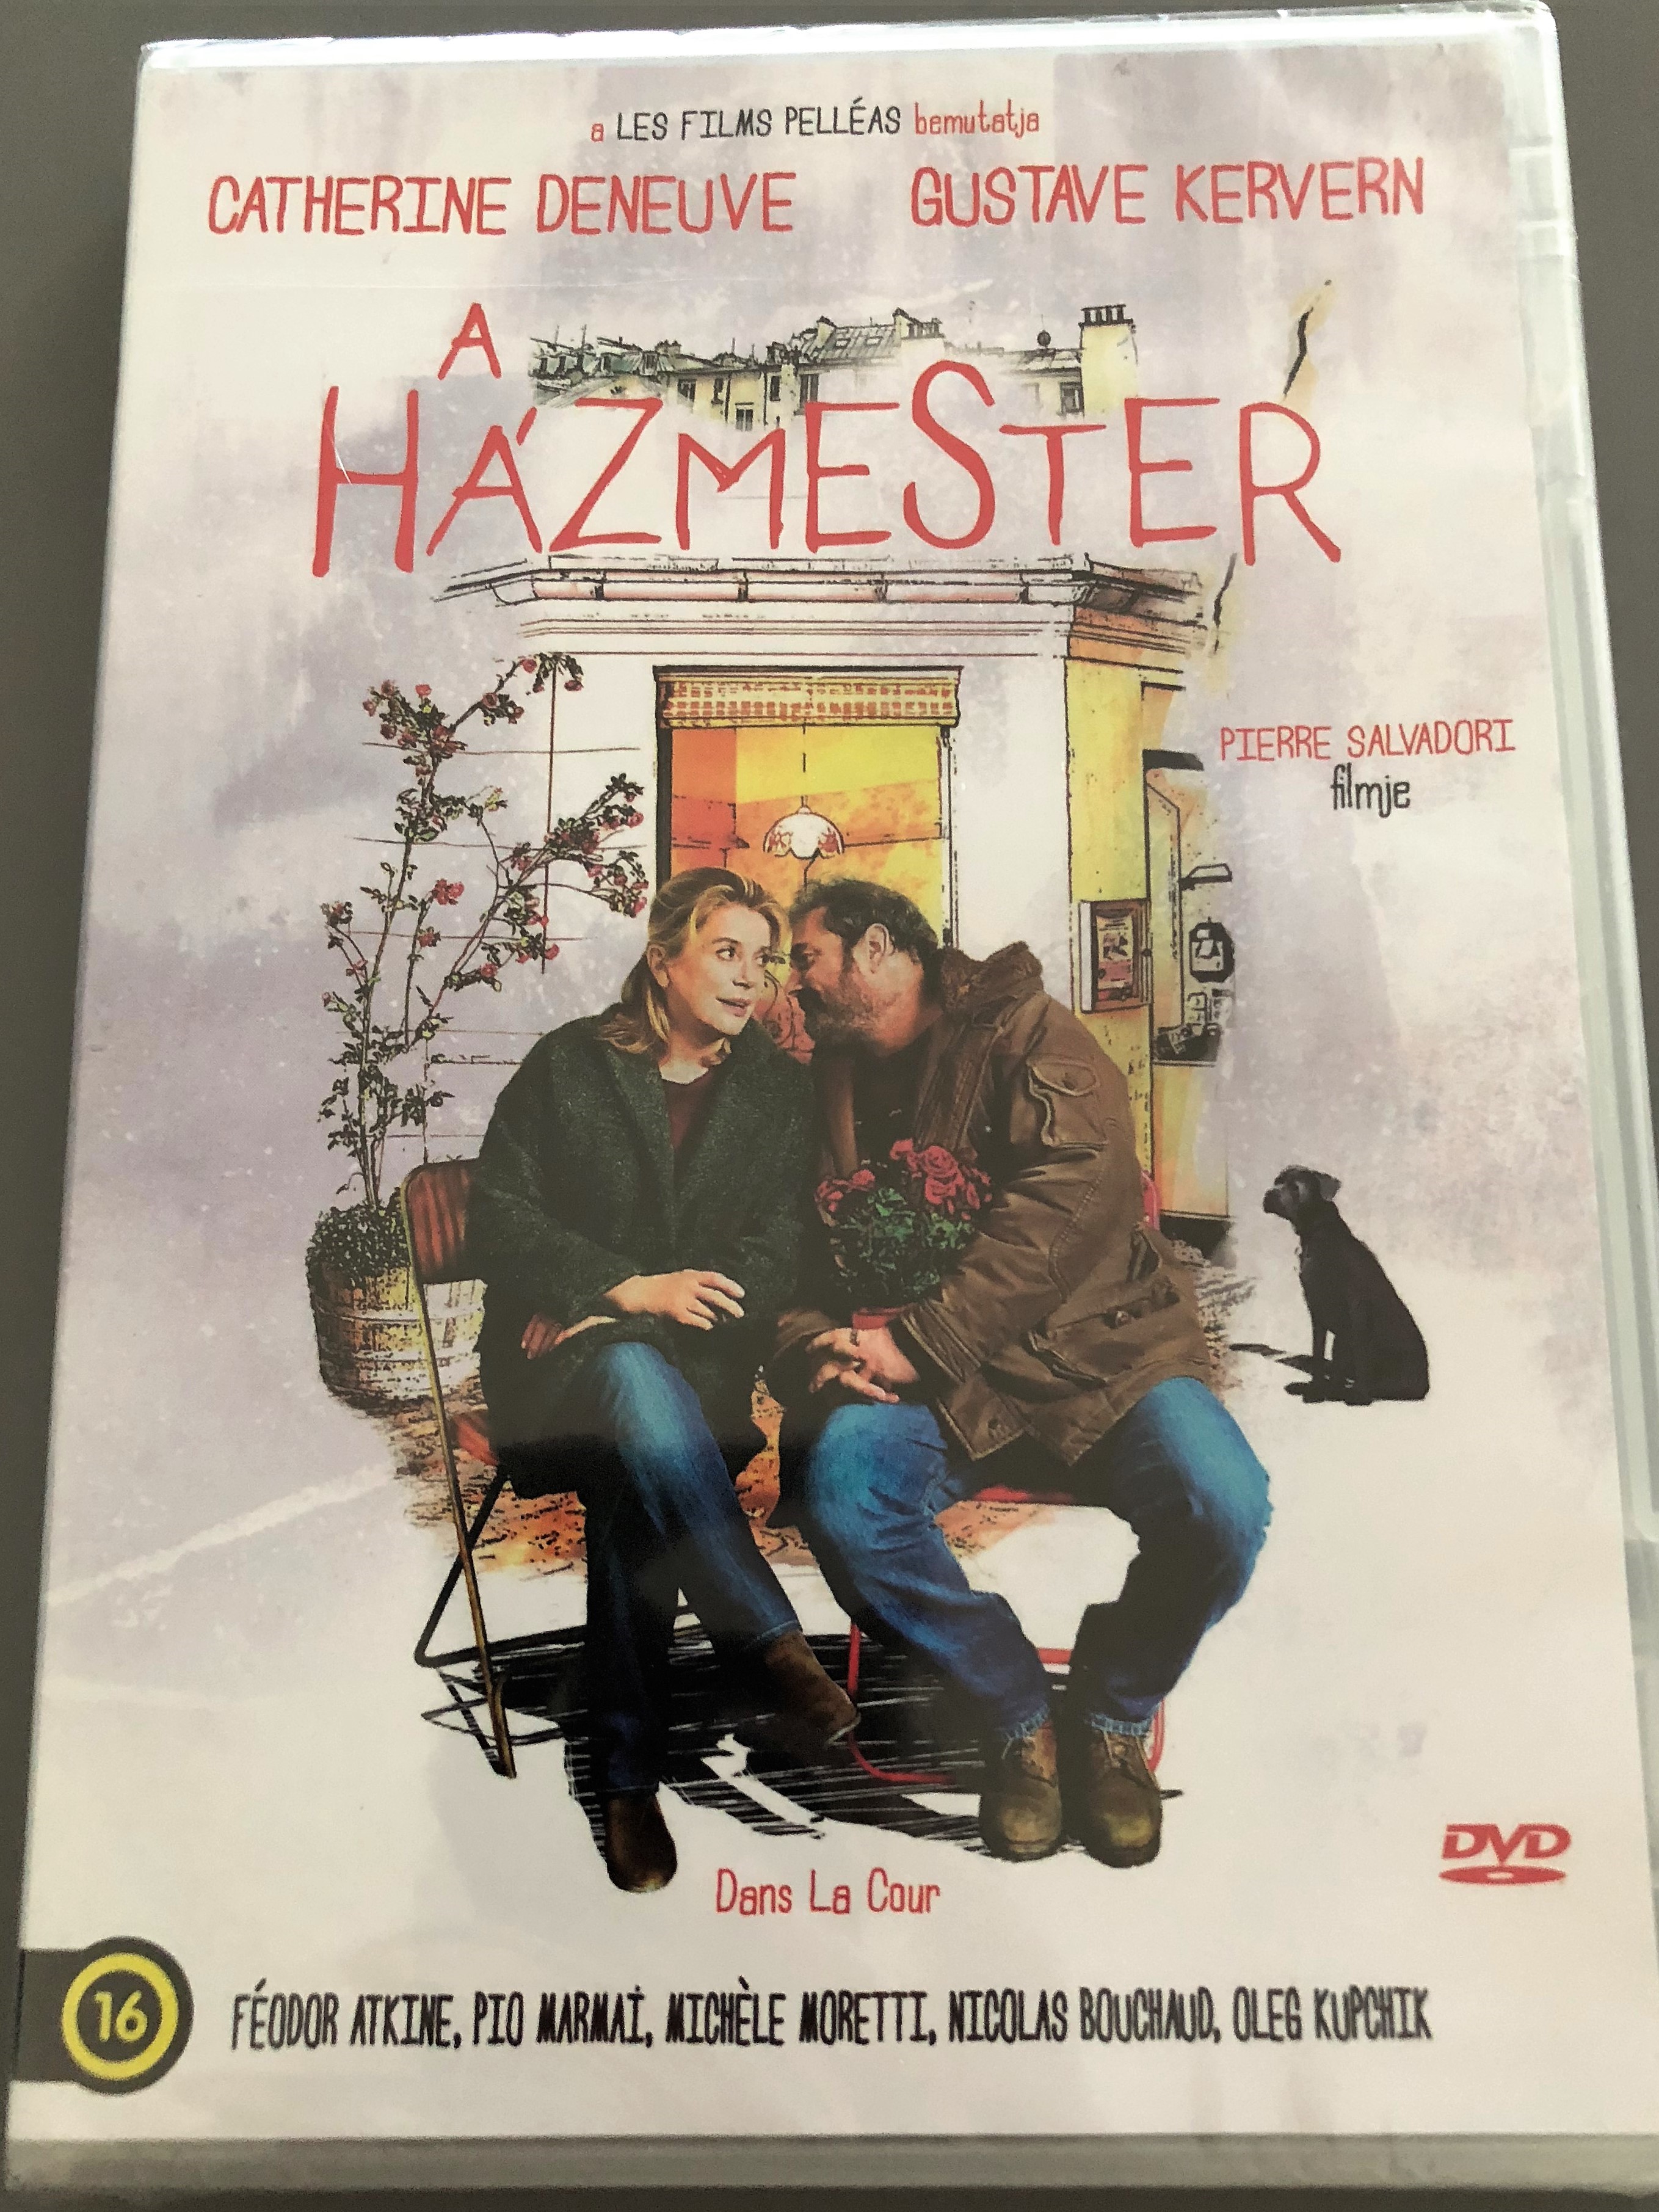 -dans-la-cour-dvd-2014-h-zmester-in-the-courtyard-directed-by-pierre-salvadori-starring-catherine-deneuve-gustave-kervern-french-comedy-drama-1-.jpg